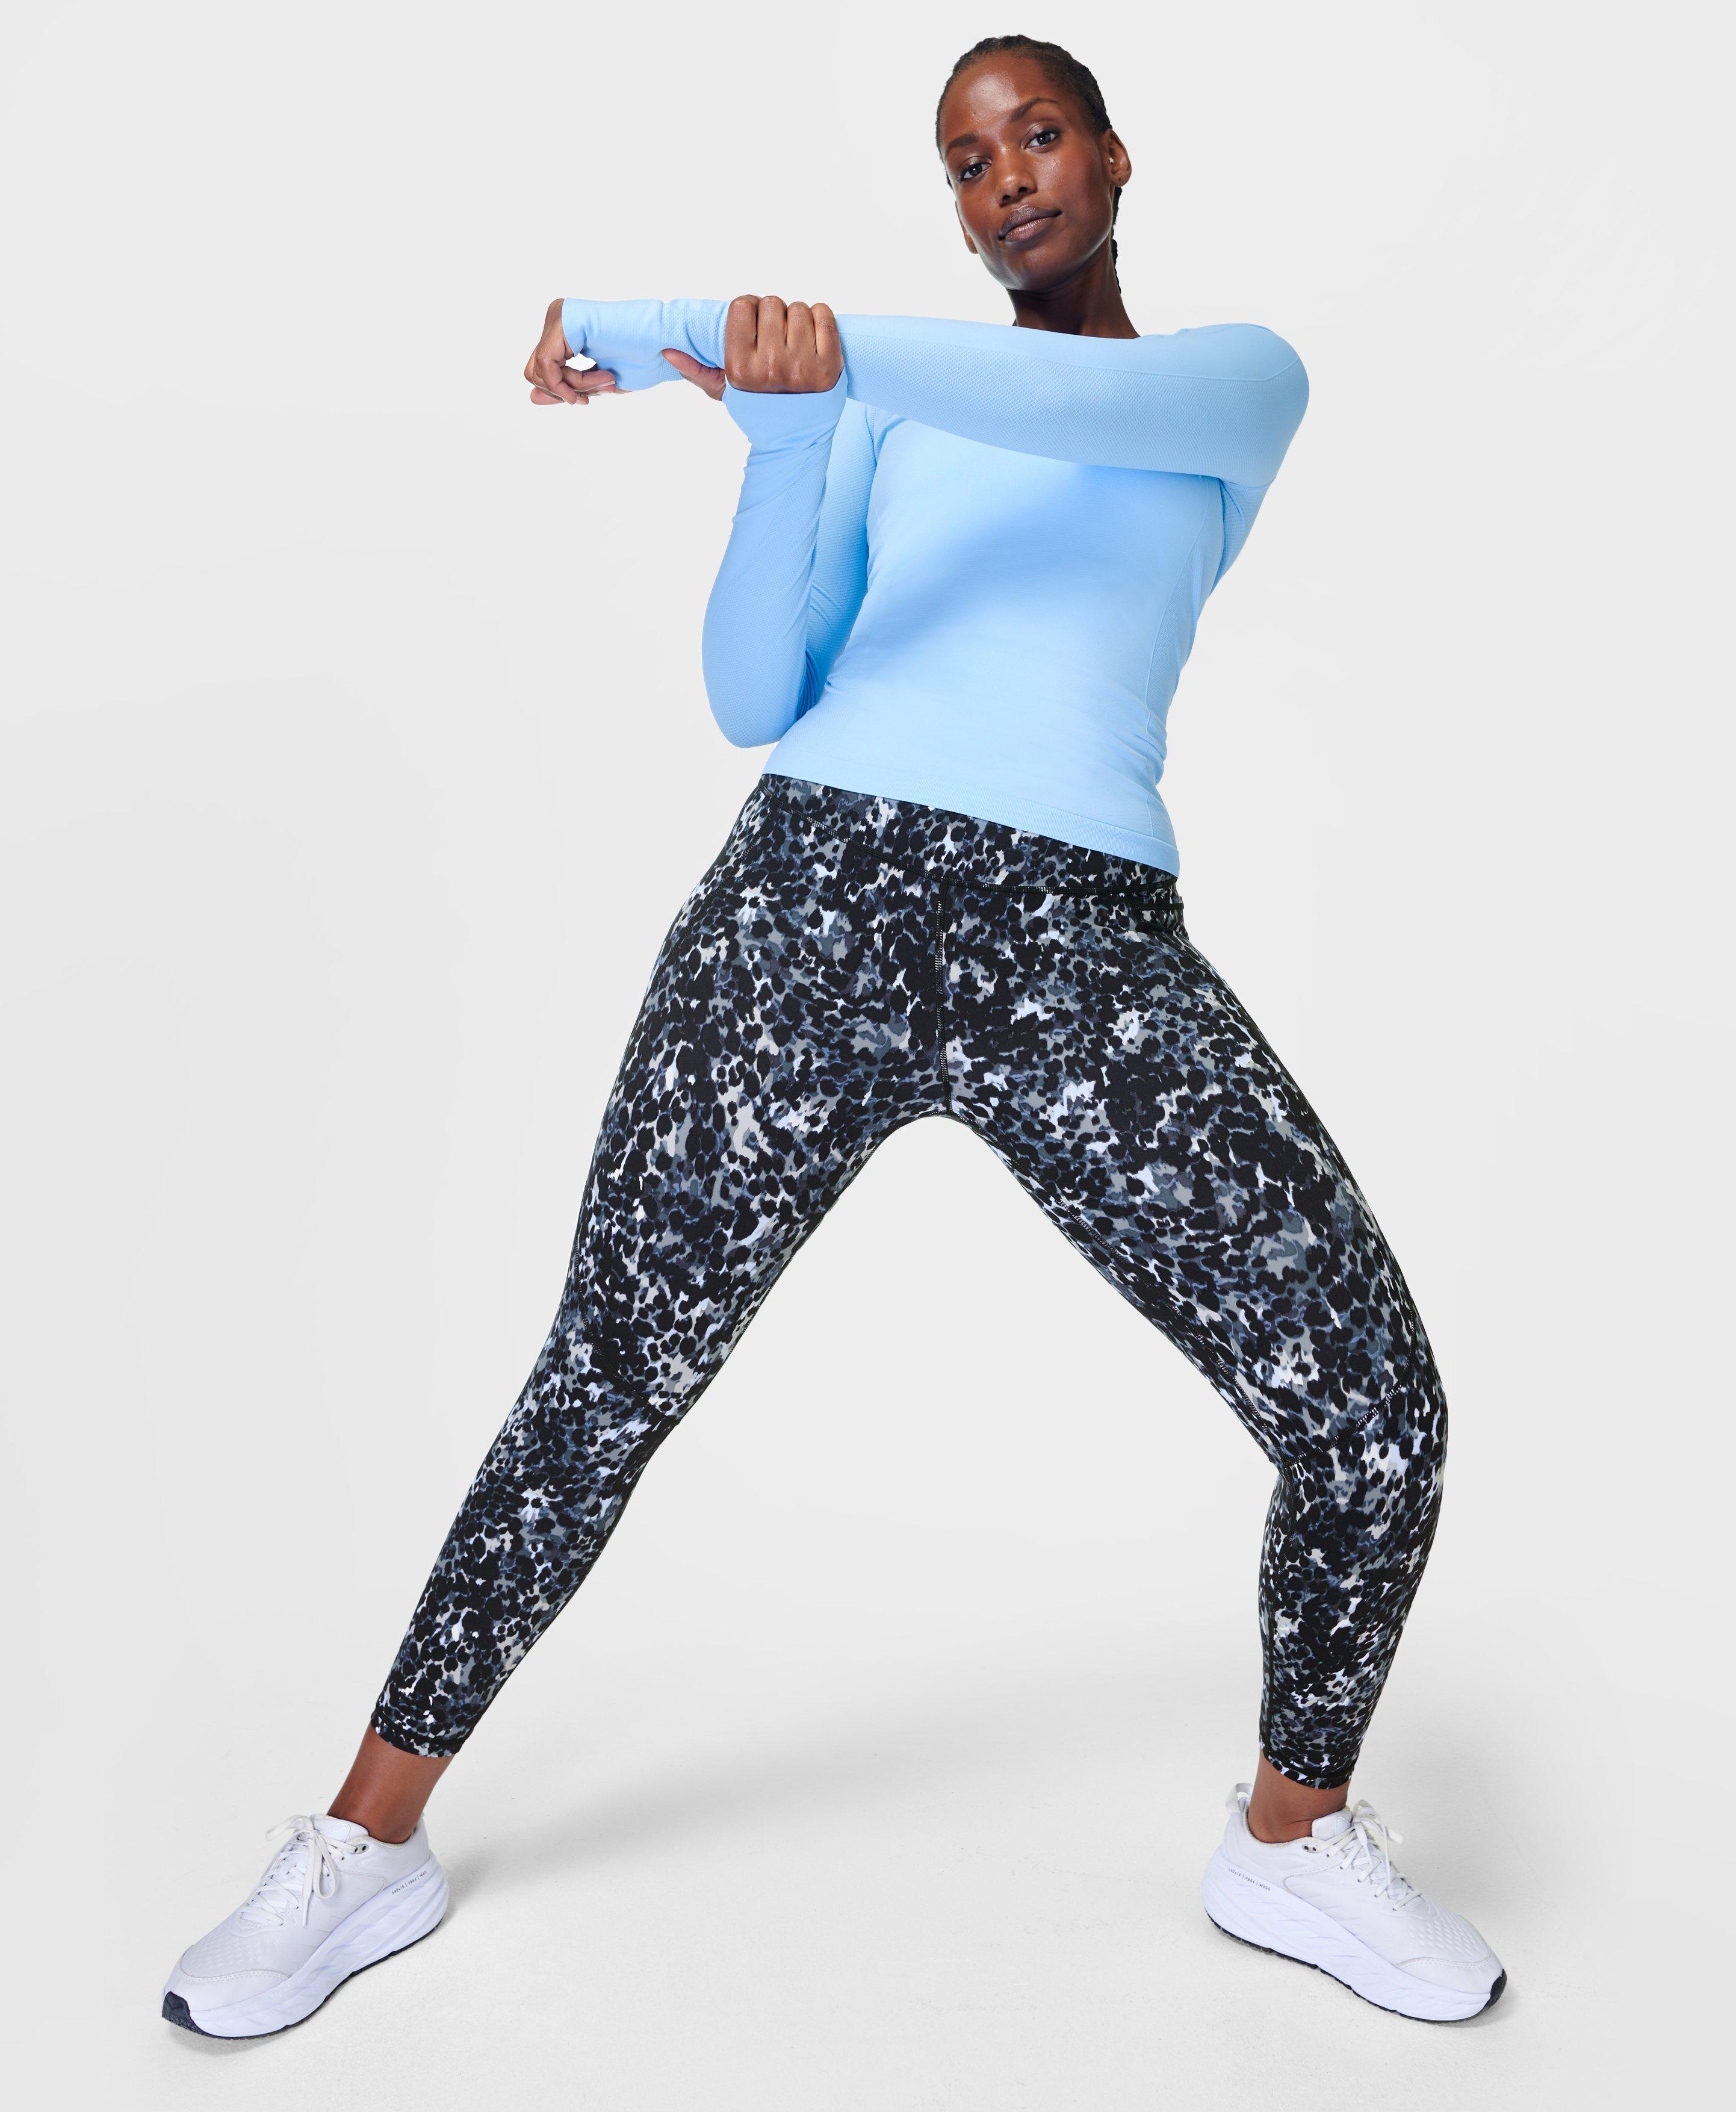 Sweaty Betty Sale $60 or Less - Shop up to 60% off